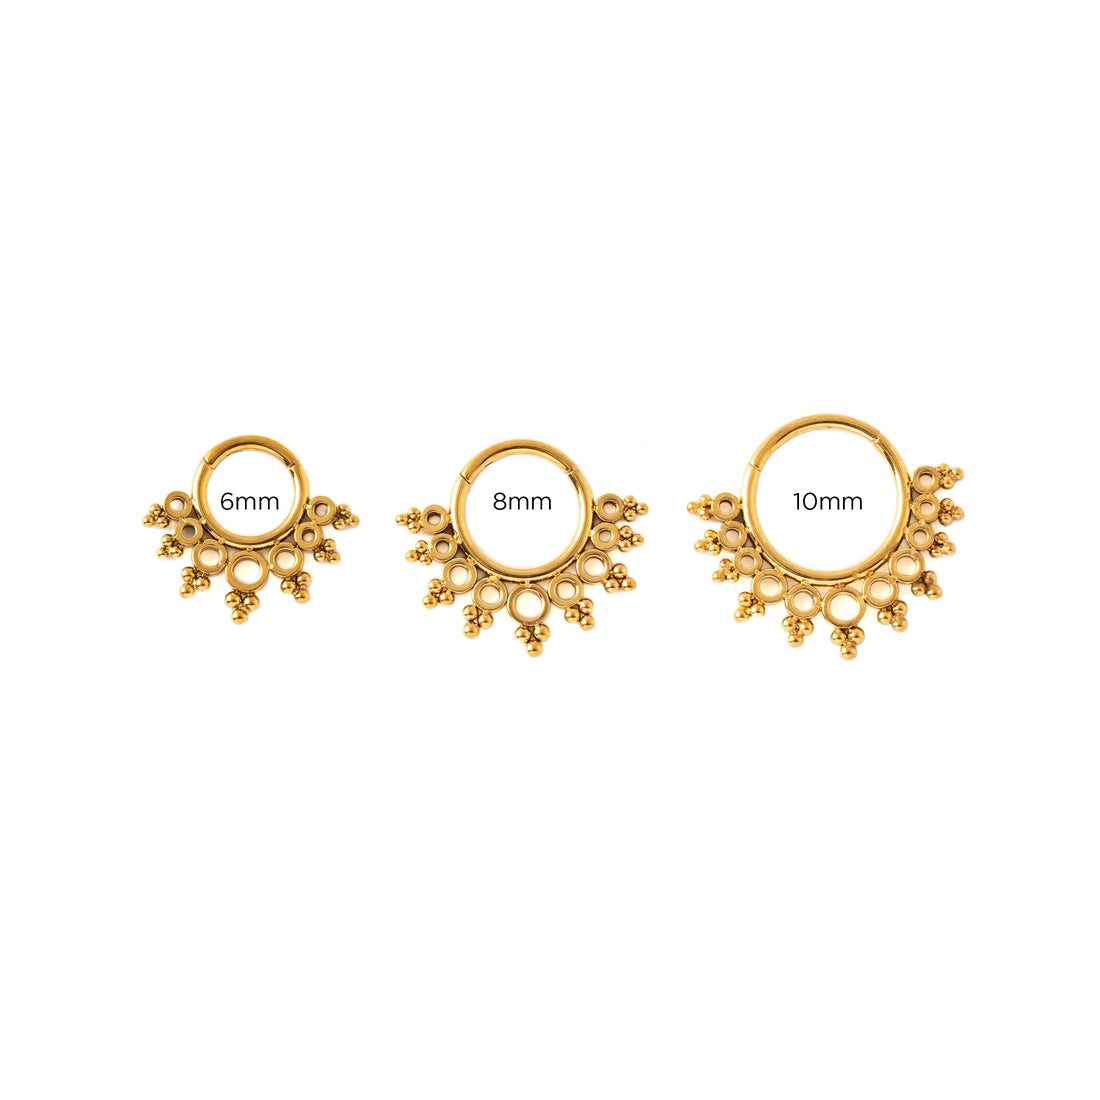 6mm, 8mm and 10mm Tarita Golden Septum Clickers frontal view